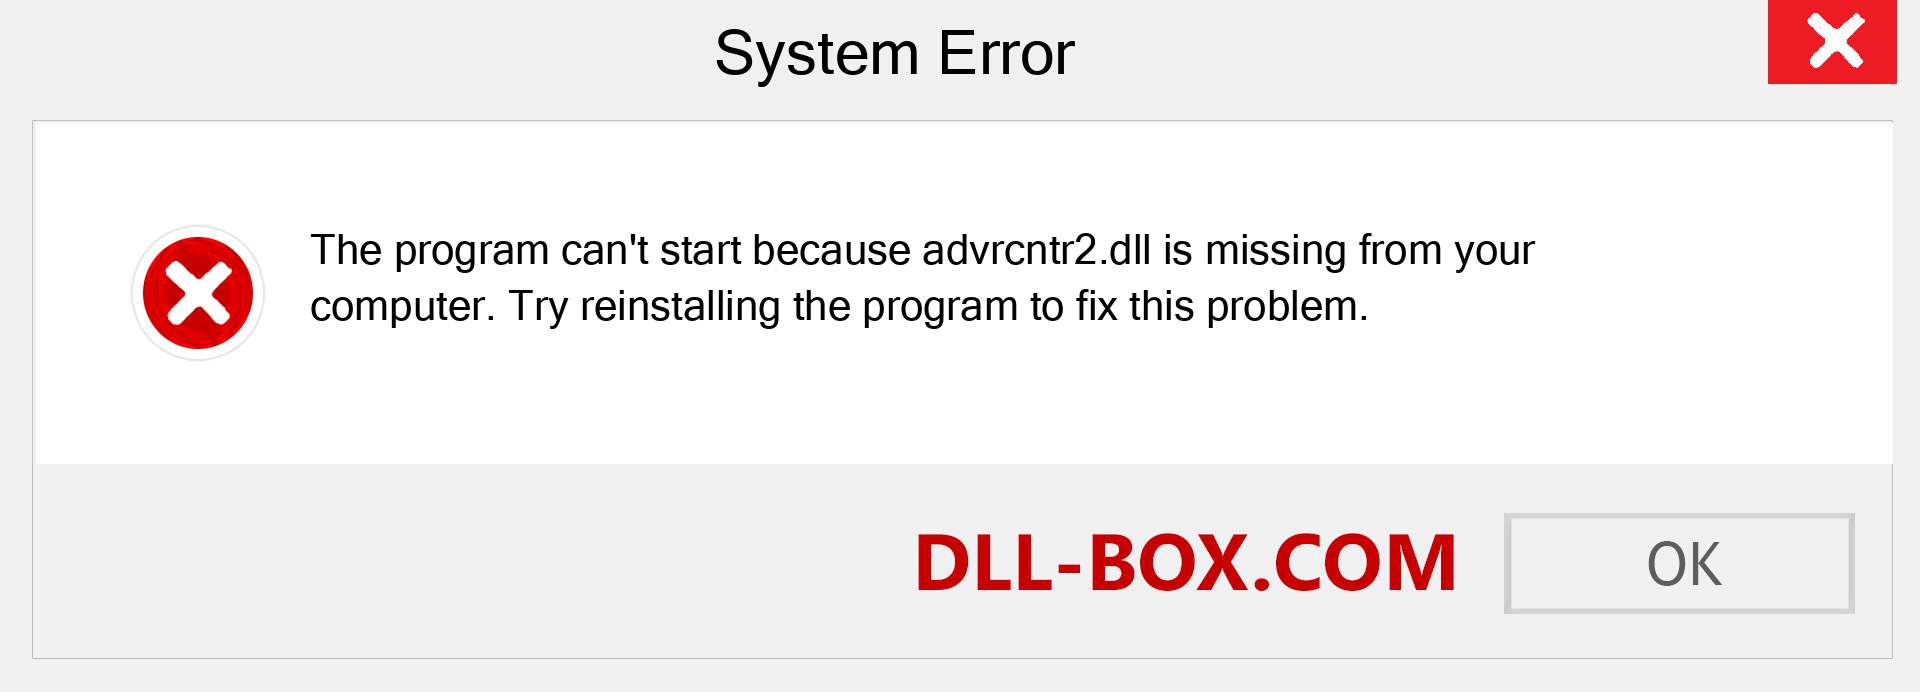  advrcntr2.dll file is missing?. Download for Windows 7, 8, 10 - Fix  advrcntr2 dll Missing Error on Windows, photos, images